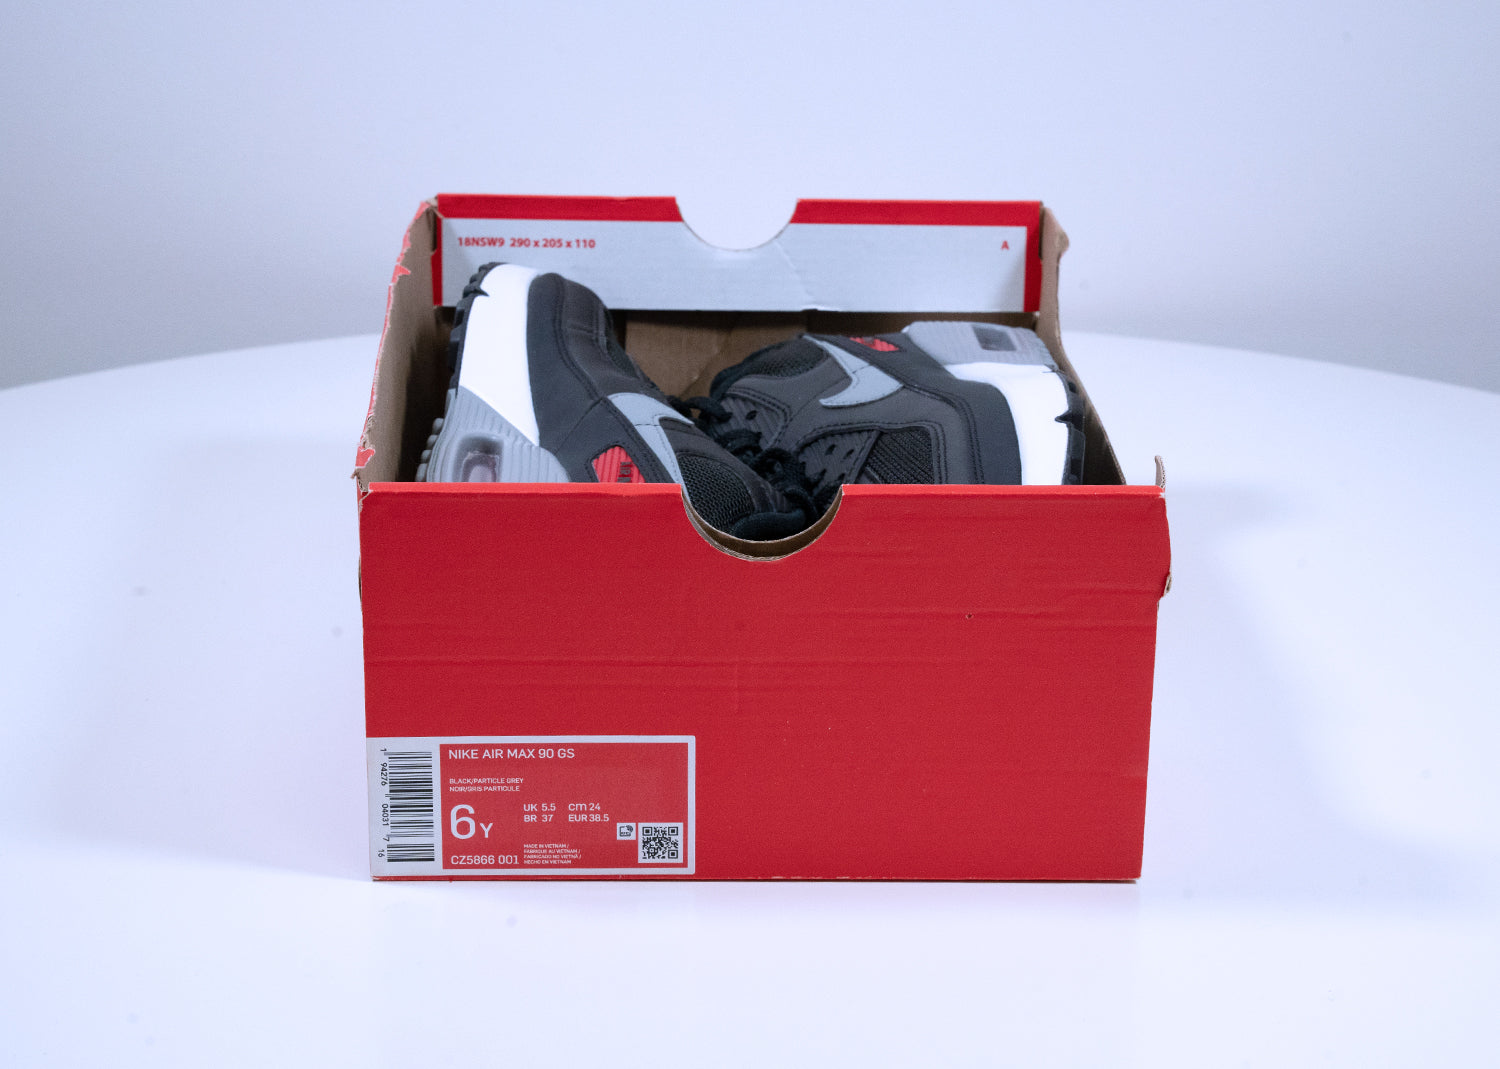 Second Chance - Multi Nike Air Max 90 Black Particle Grey (GS) - 38.5 | NEW